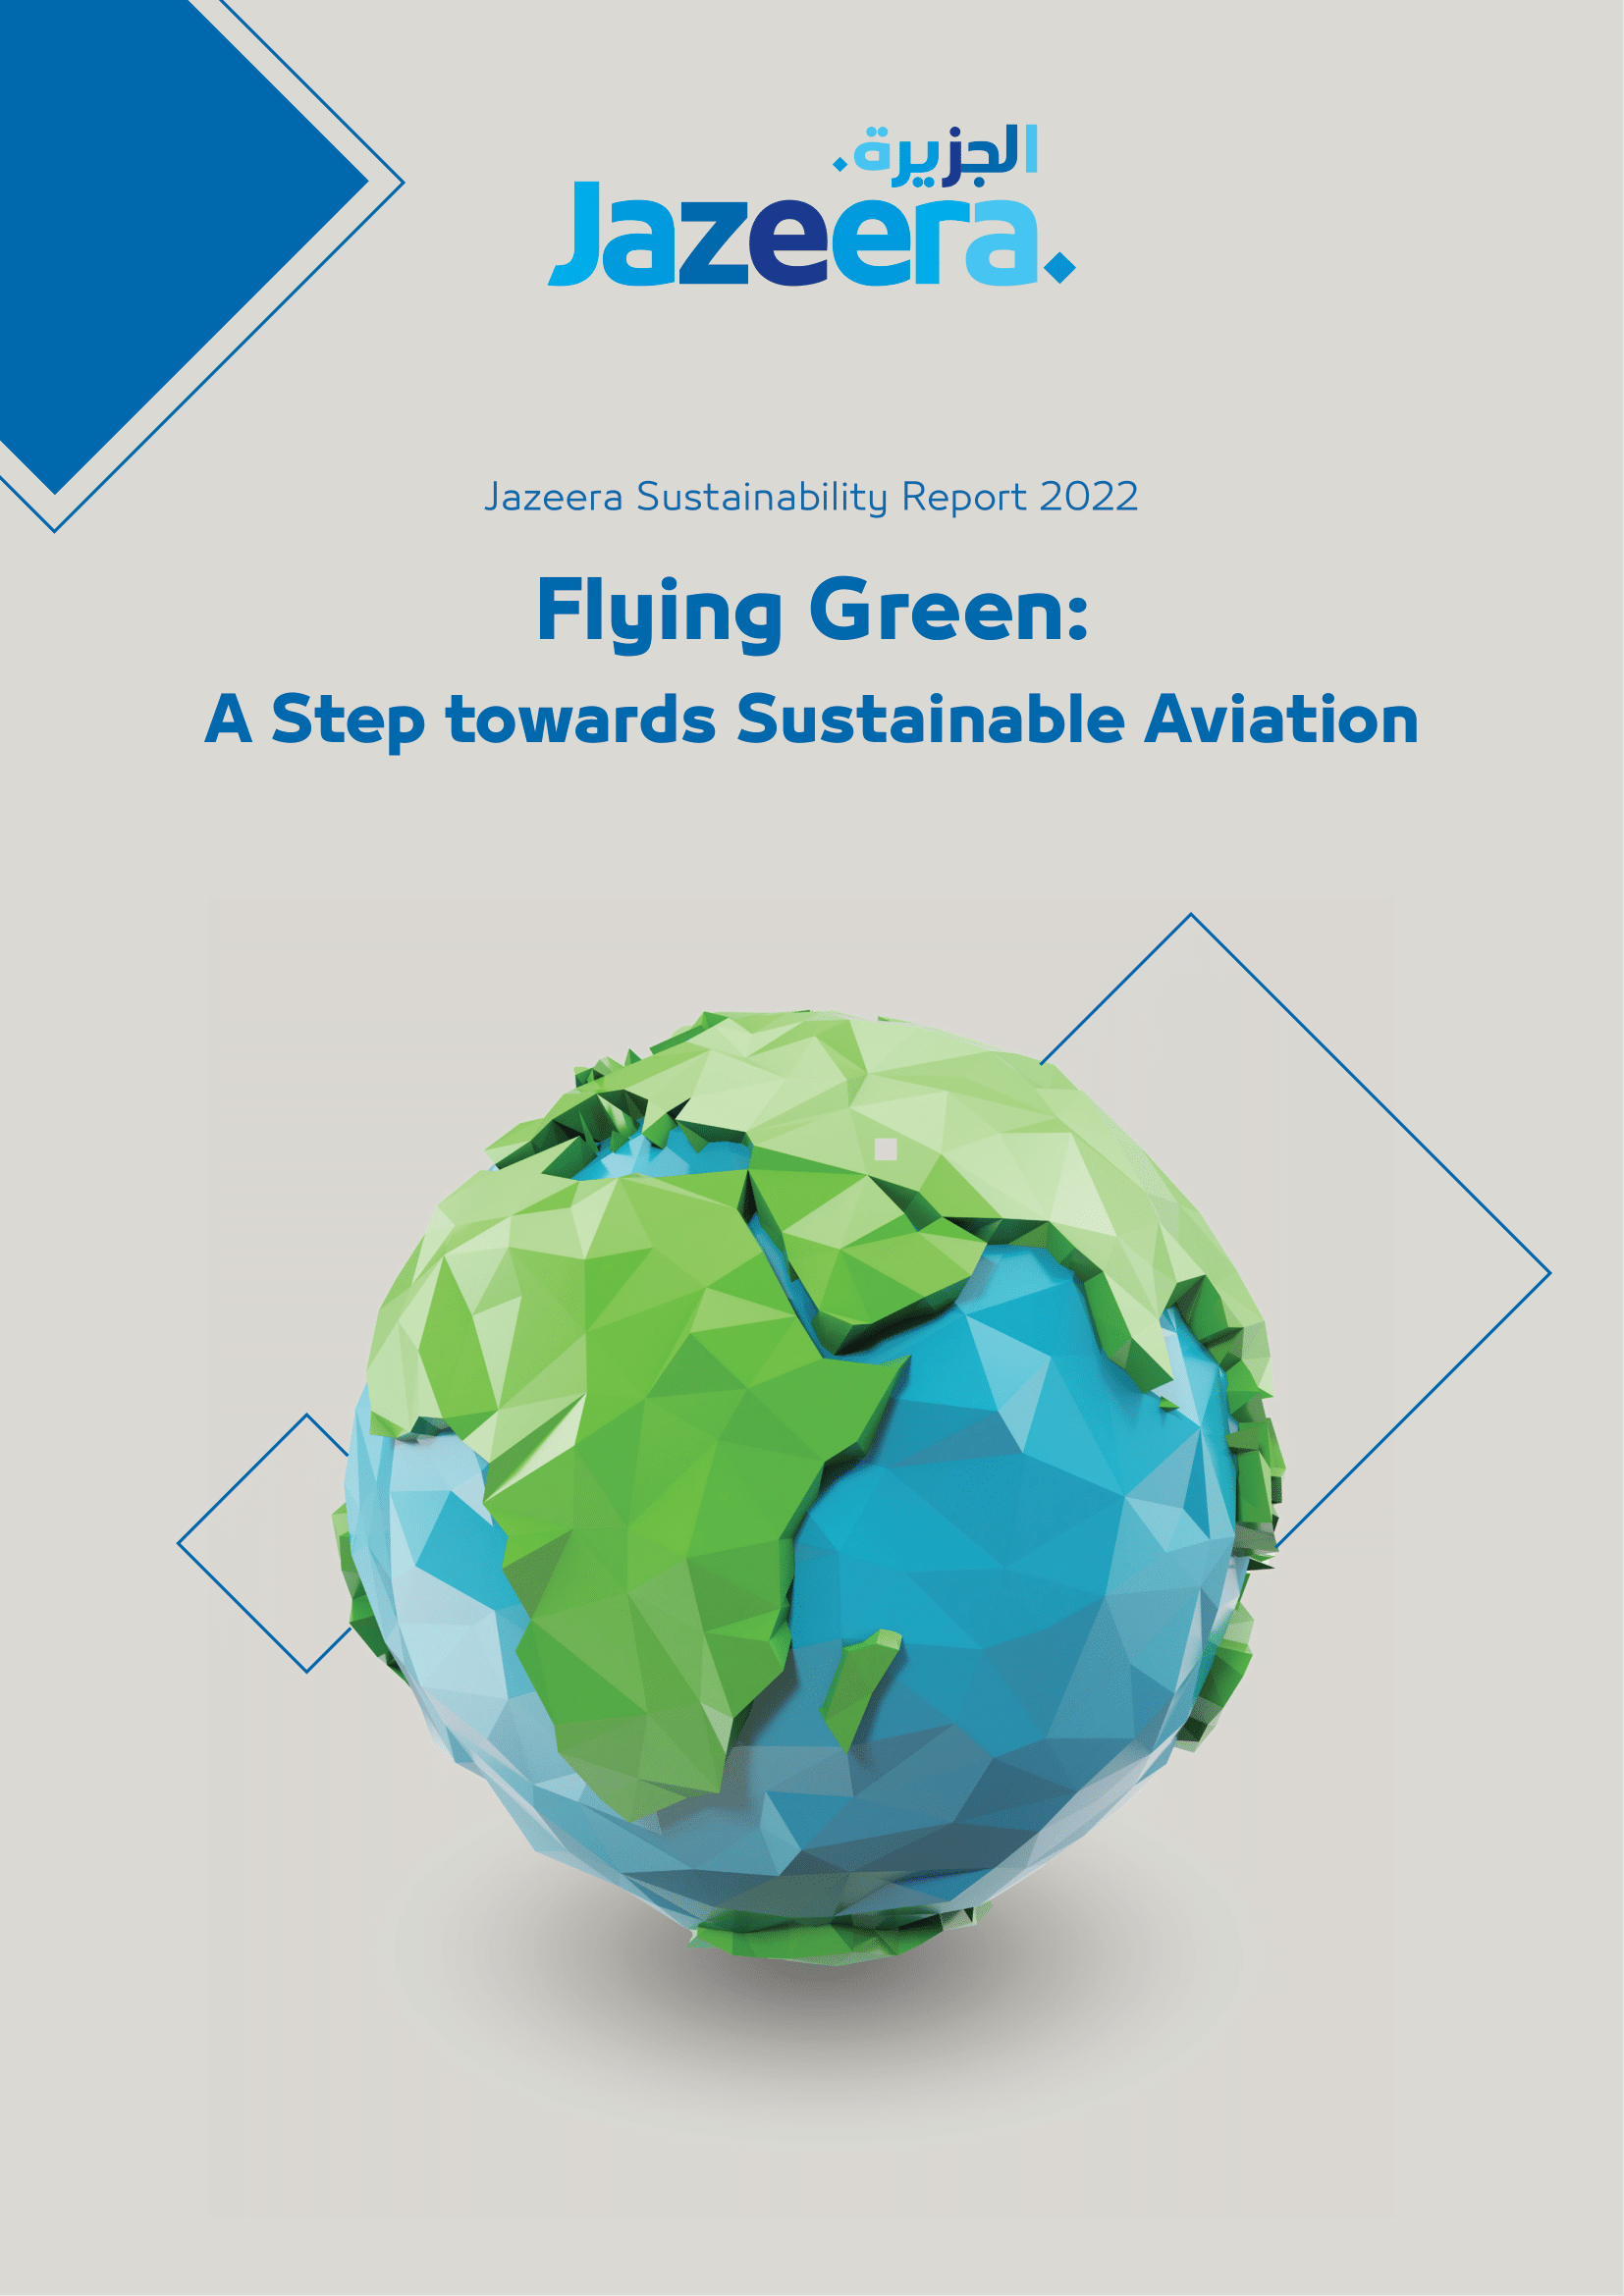 Jazeera Airways launches its first sustainability report